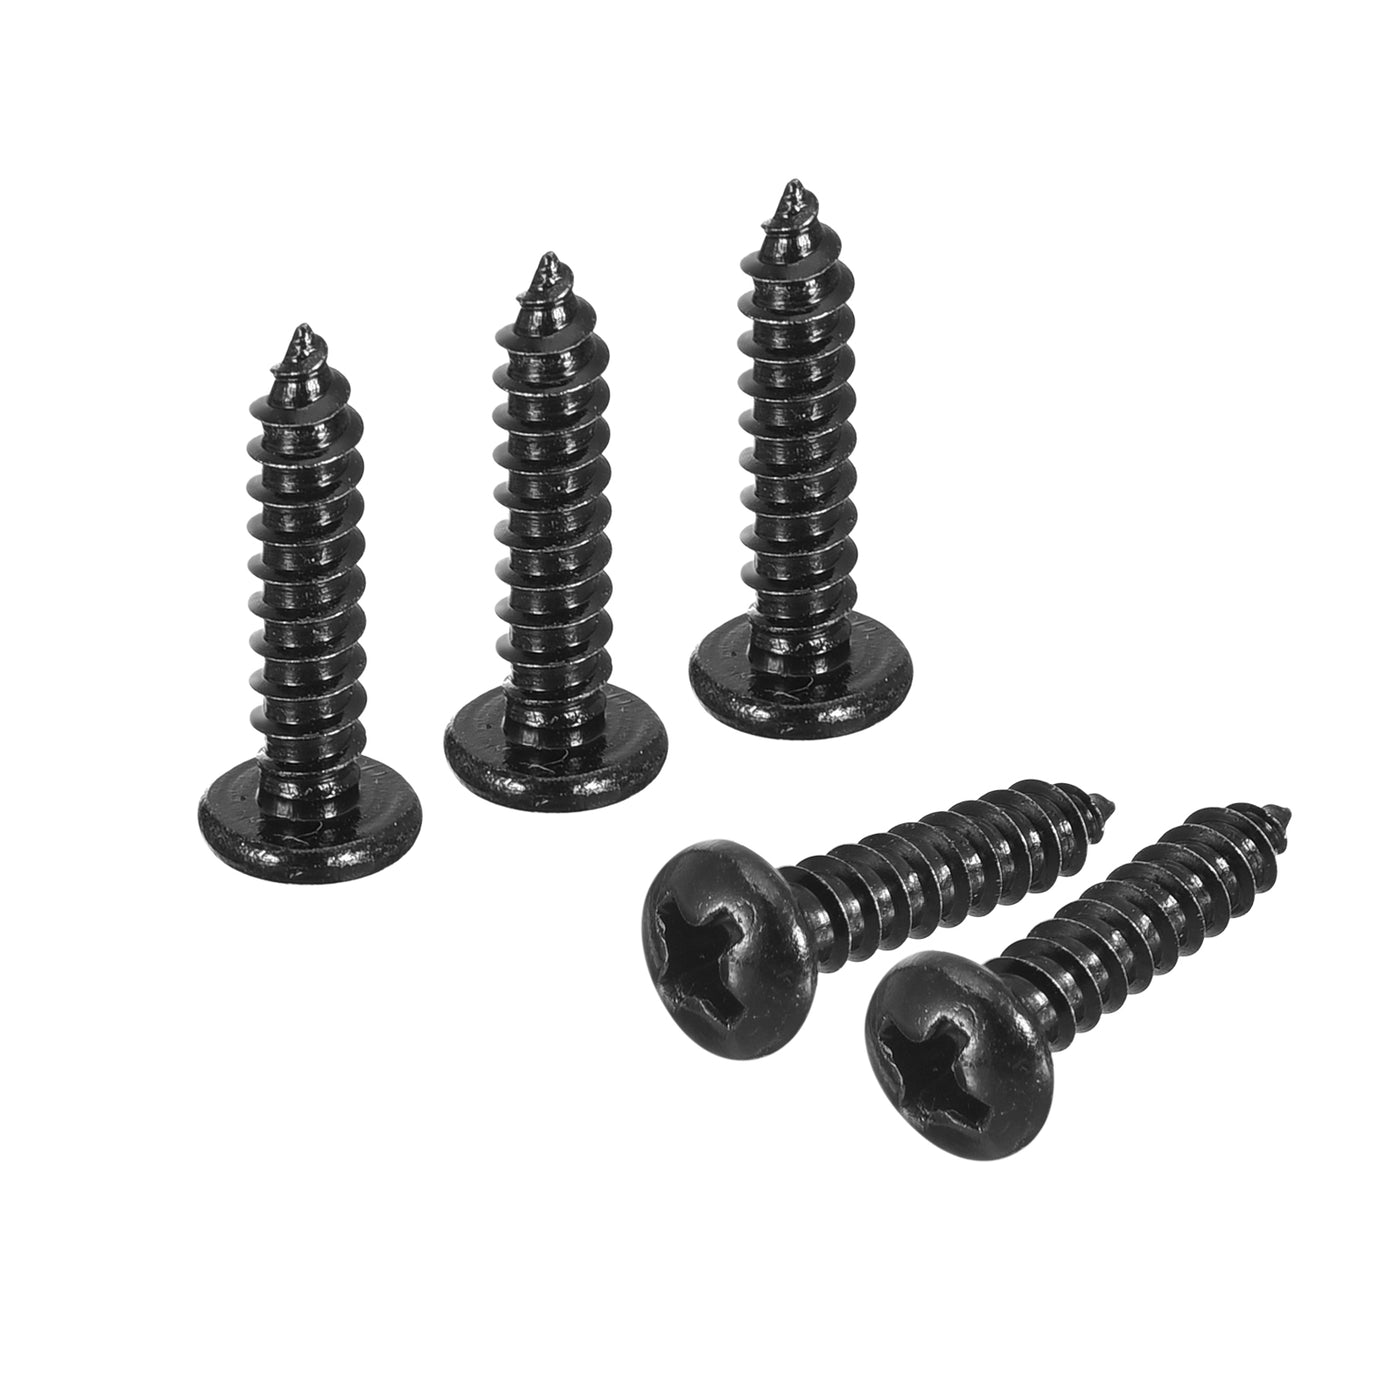 uxcell Uxcell #6 x 5/8" Phillips Pan Head Self-tapping Screw, 100pcs - 304 Stainless Steel Round Head Wood Screw Full Thread (Black)